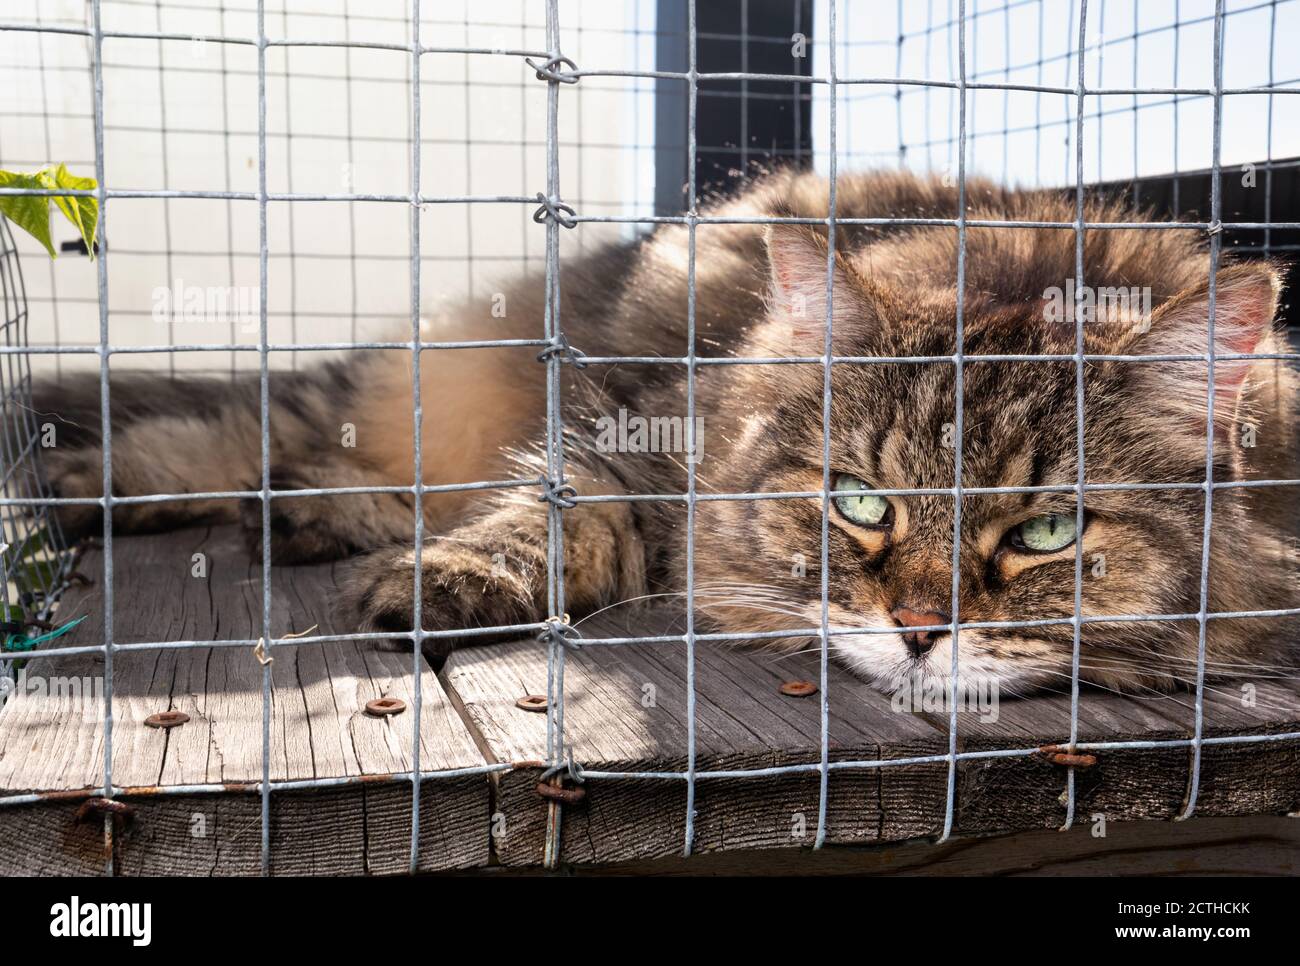 Cat in catio / outdoor cat enclosure on rooftop patio. Full body of senior long hair tabby cat with beautiful green eyes. Cat is looking at the camera Stock Photo